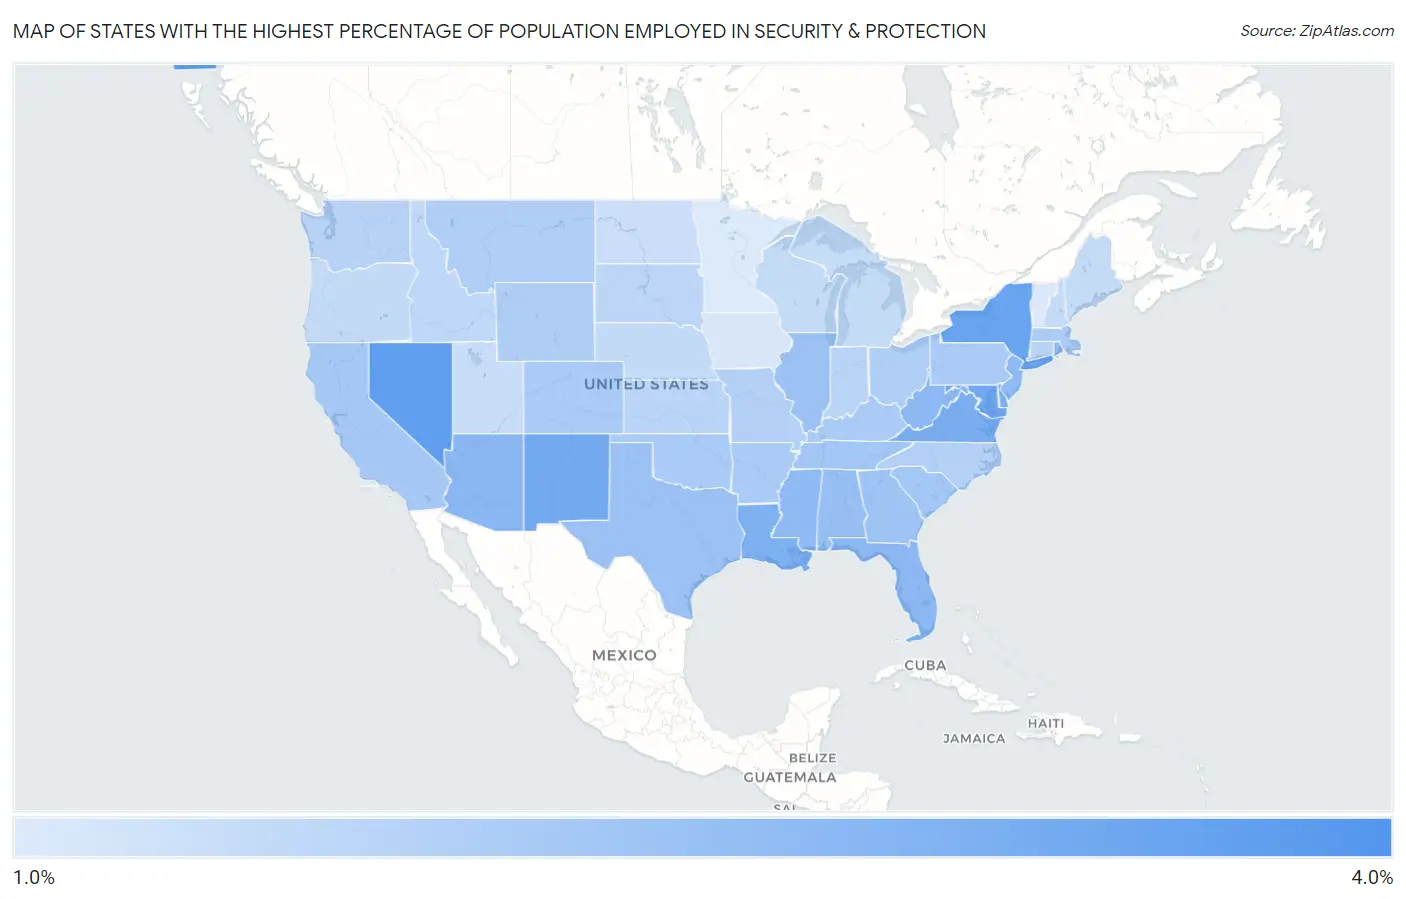 States with the Highest Percentage of Population Employed in Security & Protection in the United States Map